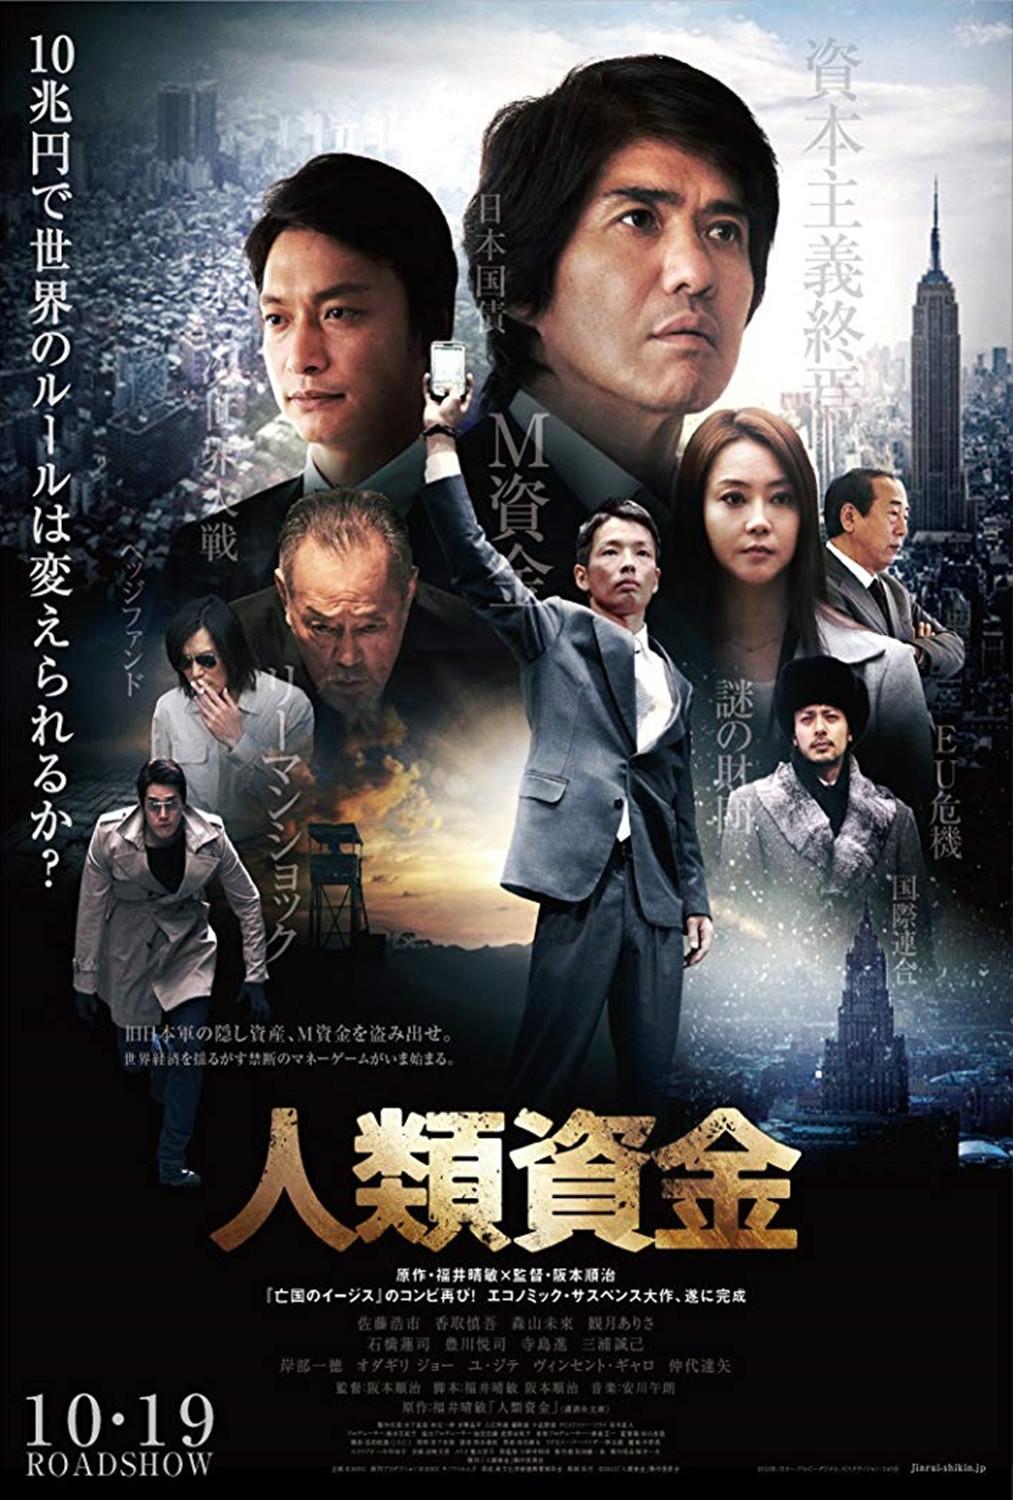 ʽ The.Human.Trust.2013.JAPANESE.1080p.BluRay.x264.DTS-WiKi 19.99GB-1.png